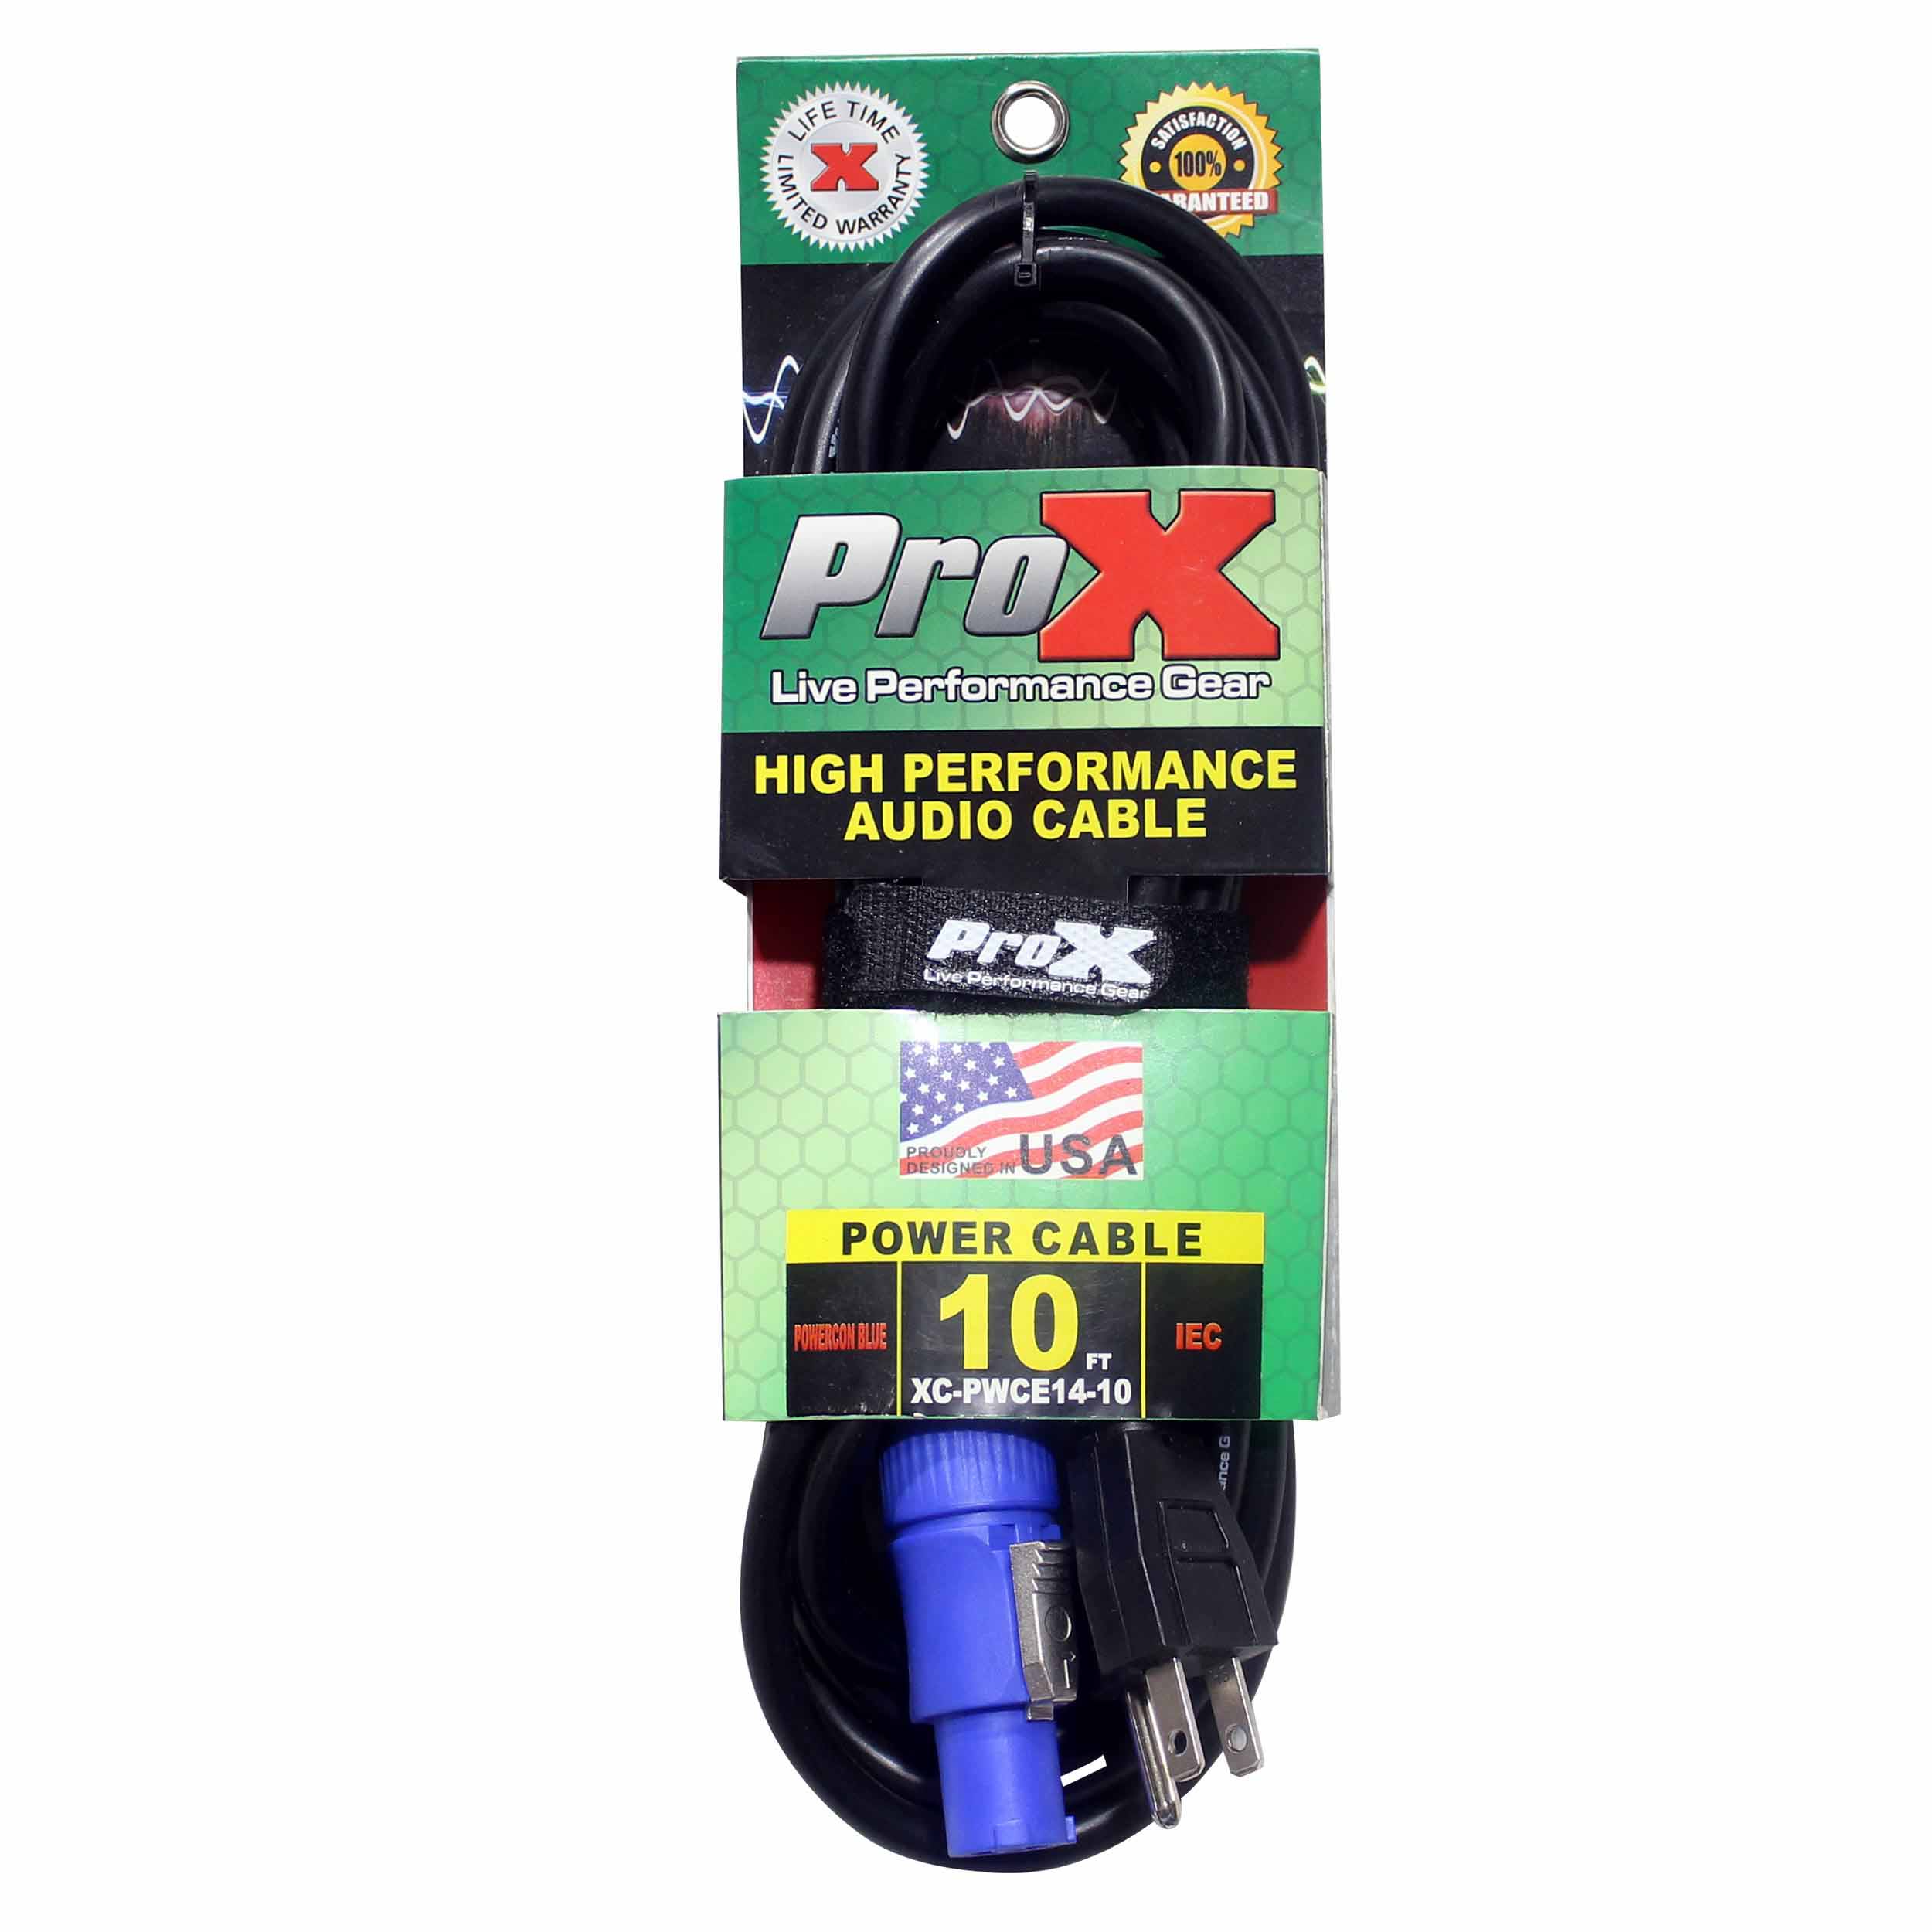 ProX XC-PWCE14-10, 14 AWG High Performance Power Cord NEMA 5-15 Edison to Blue Male for Powercon Compatible Devices - 10 Feet - Hollywood DJ